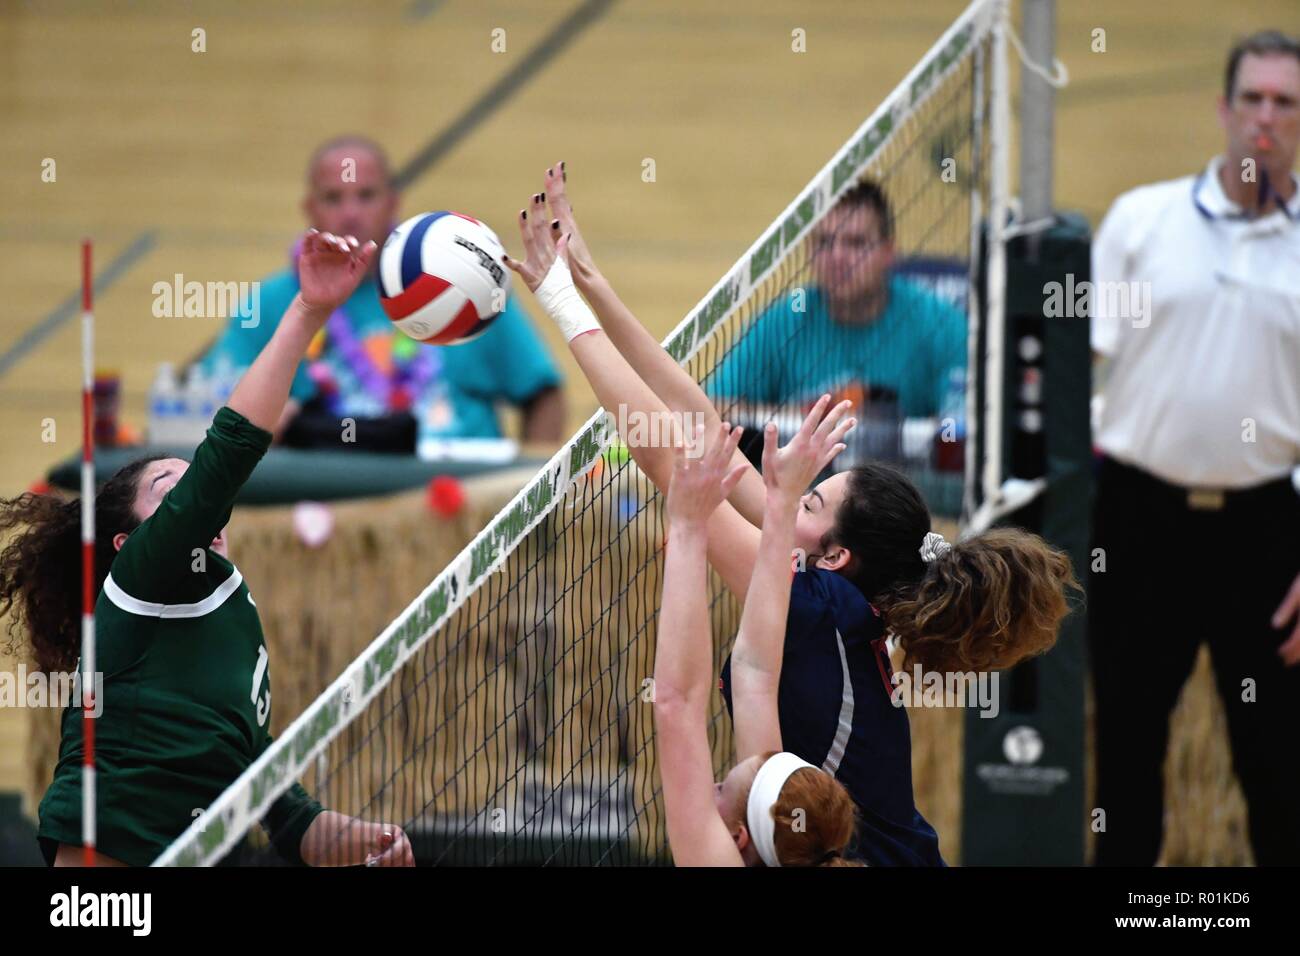 Player, at left, having her kill shot blocked at the net by a pair of opposing elevated players. USA. Stock Photo